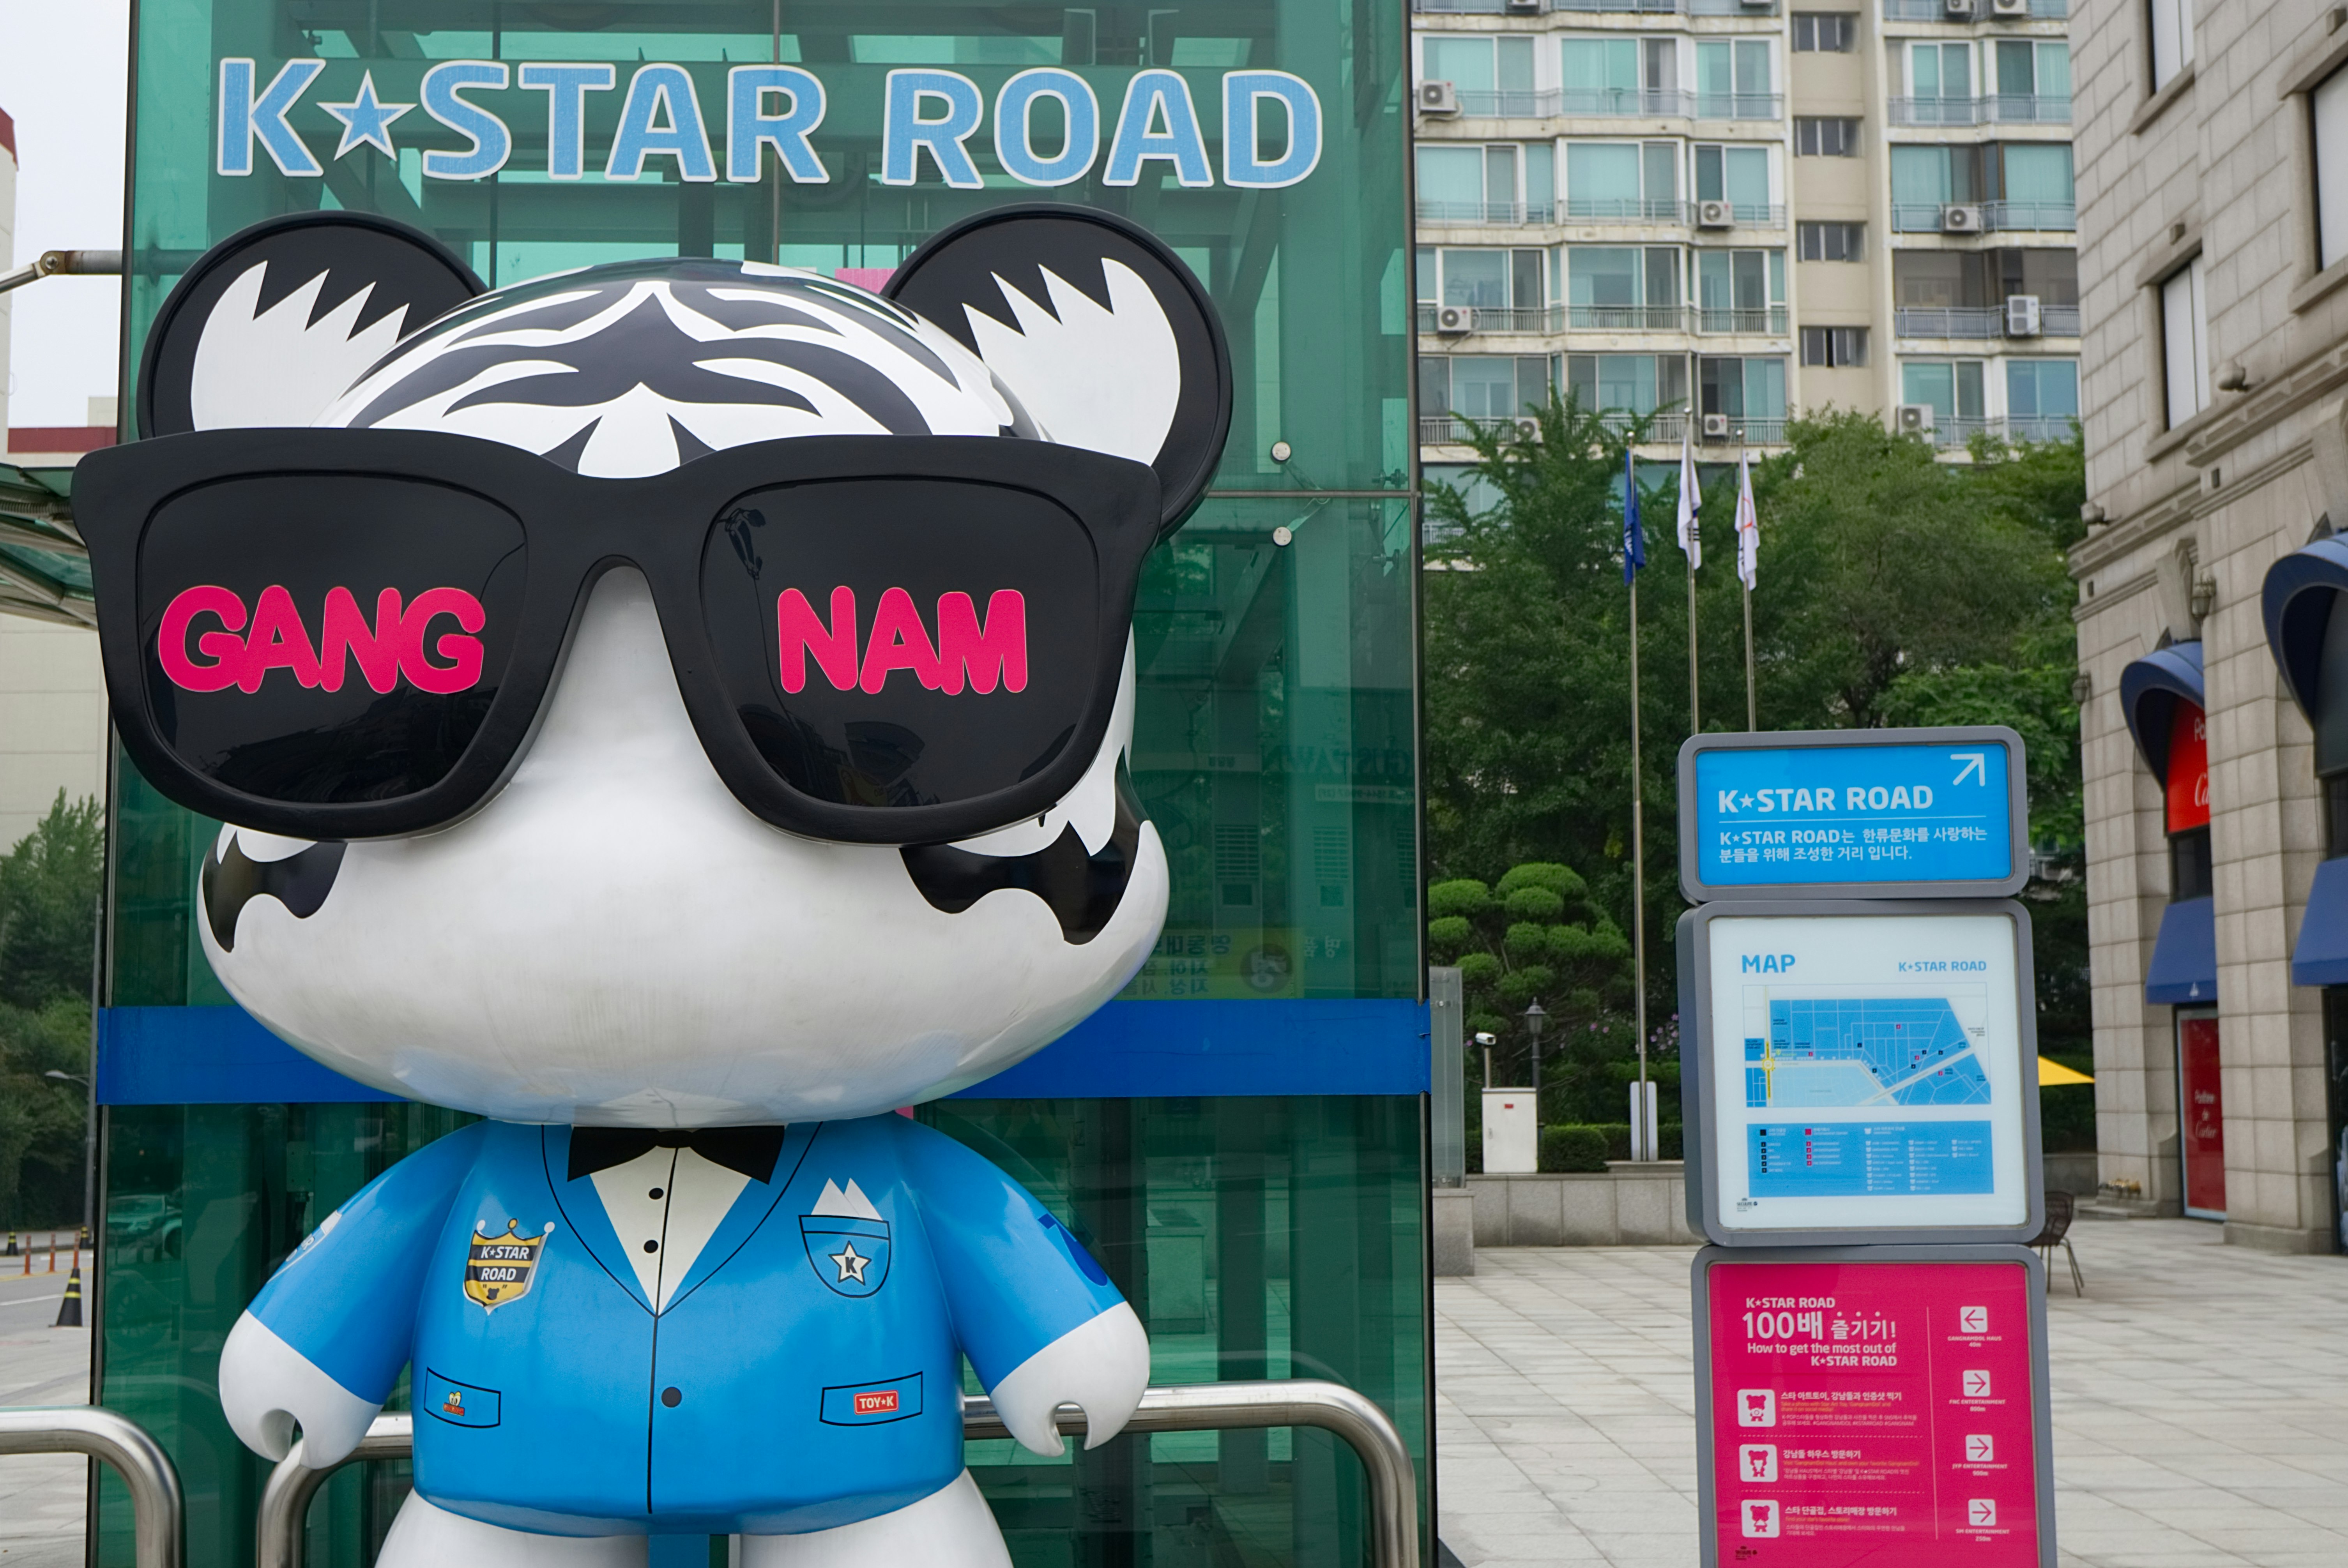 One of the K-Pop statues at the Gangnam K-Star ROAD.